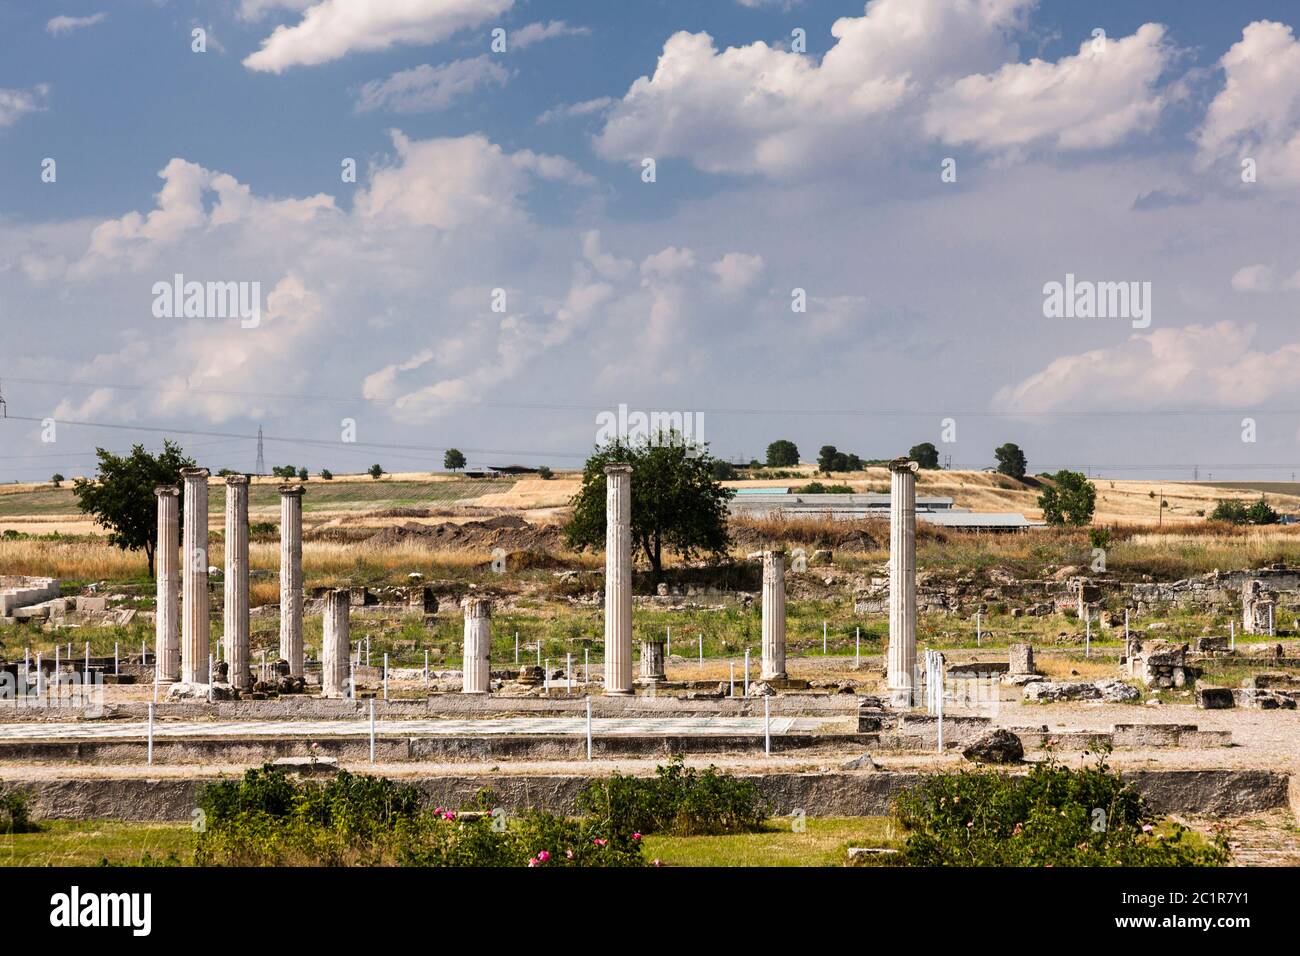 Archaelogical Site of Pella, Ancient capital of Macedon kingdom, Birthplace of Alexander the Great, Pella, Central Macedonia,Greece,Europe Stock Photo